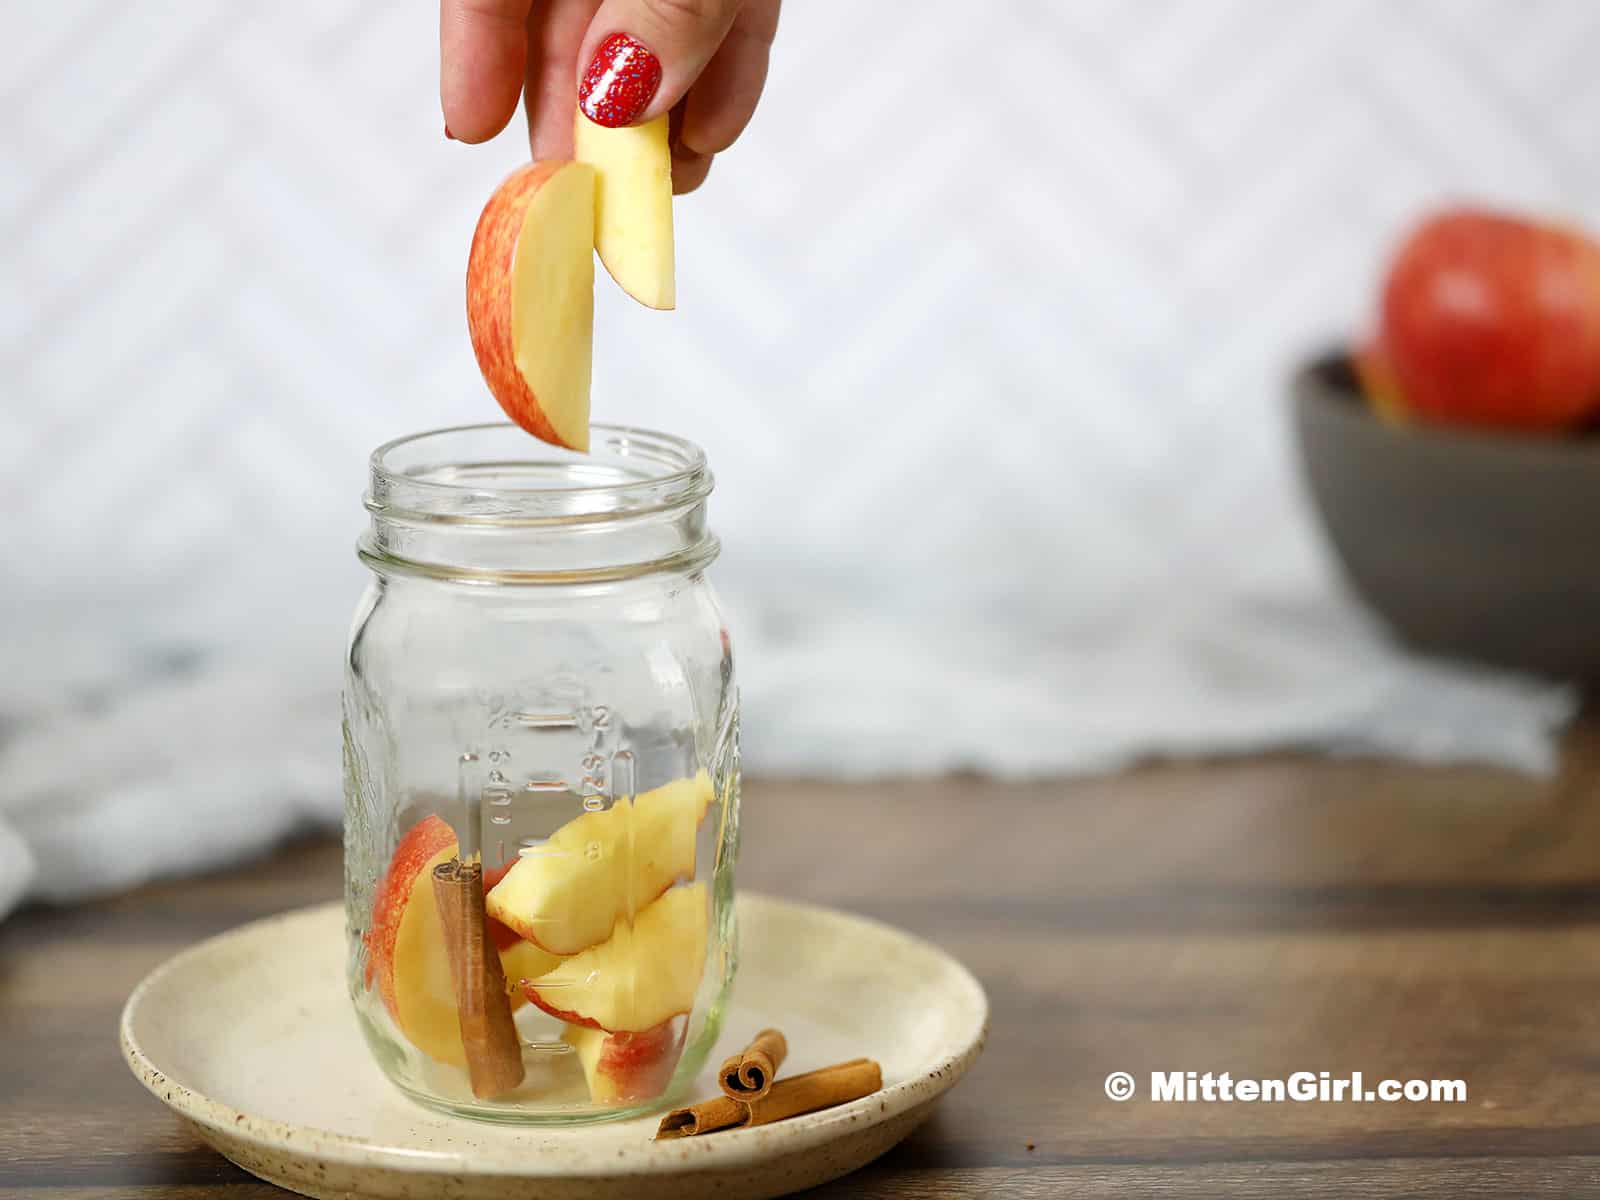 Apple slices being dropped in a mason jar.